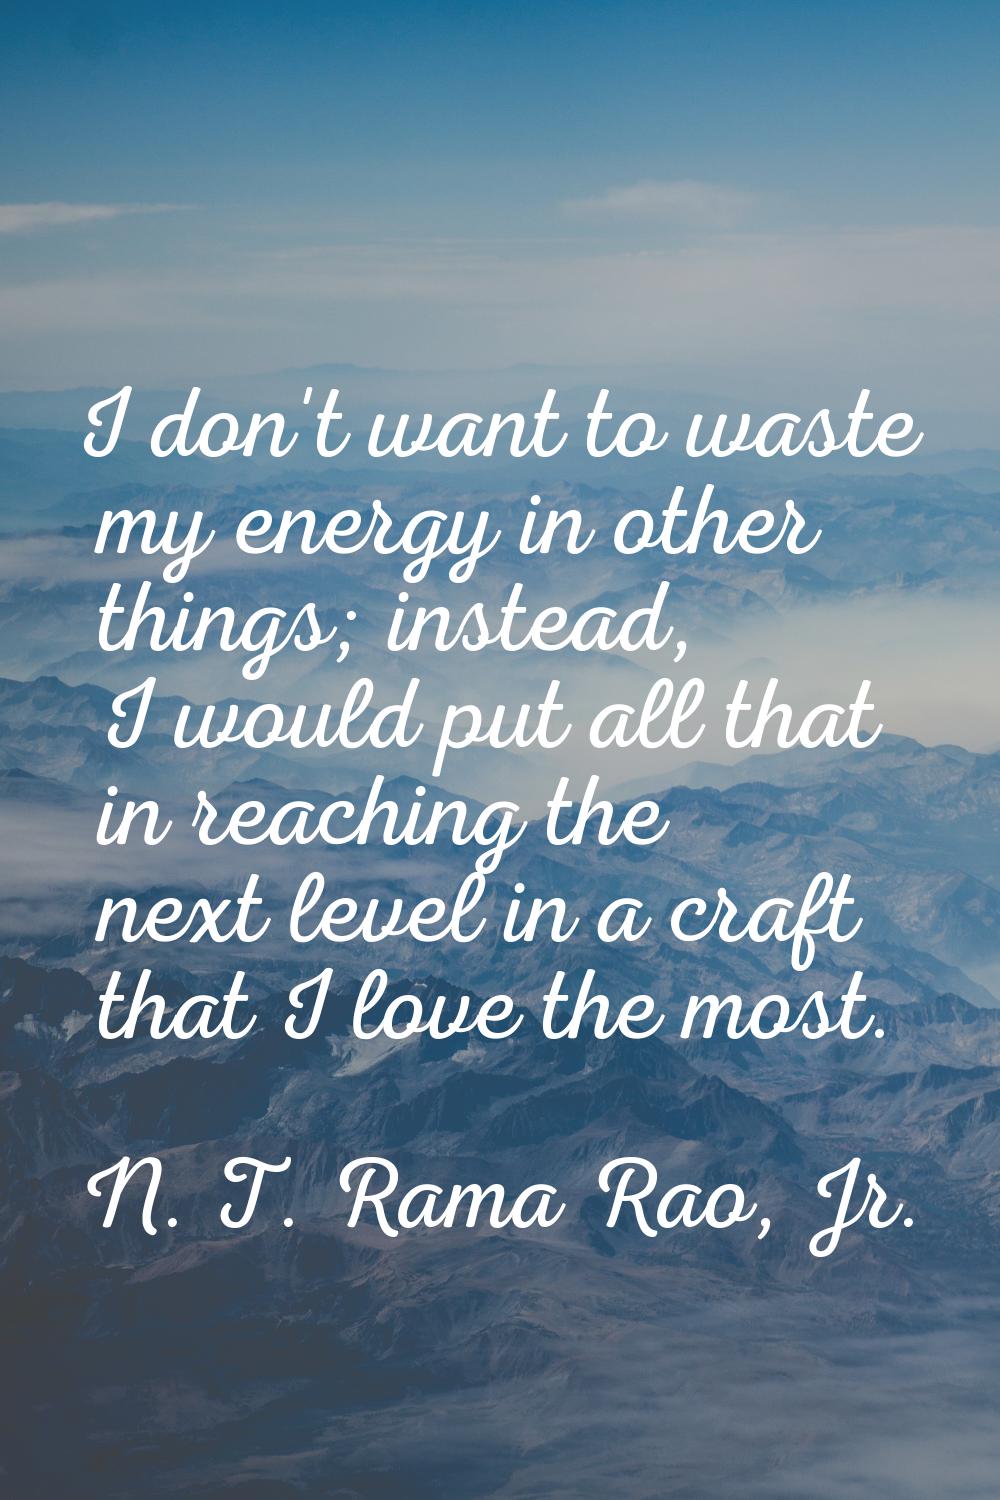 I don't want to waste my energy in other things; instead, I would put all that in reaching the next